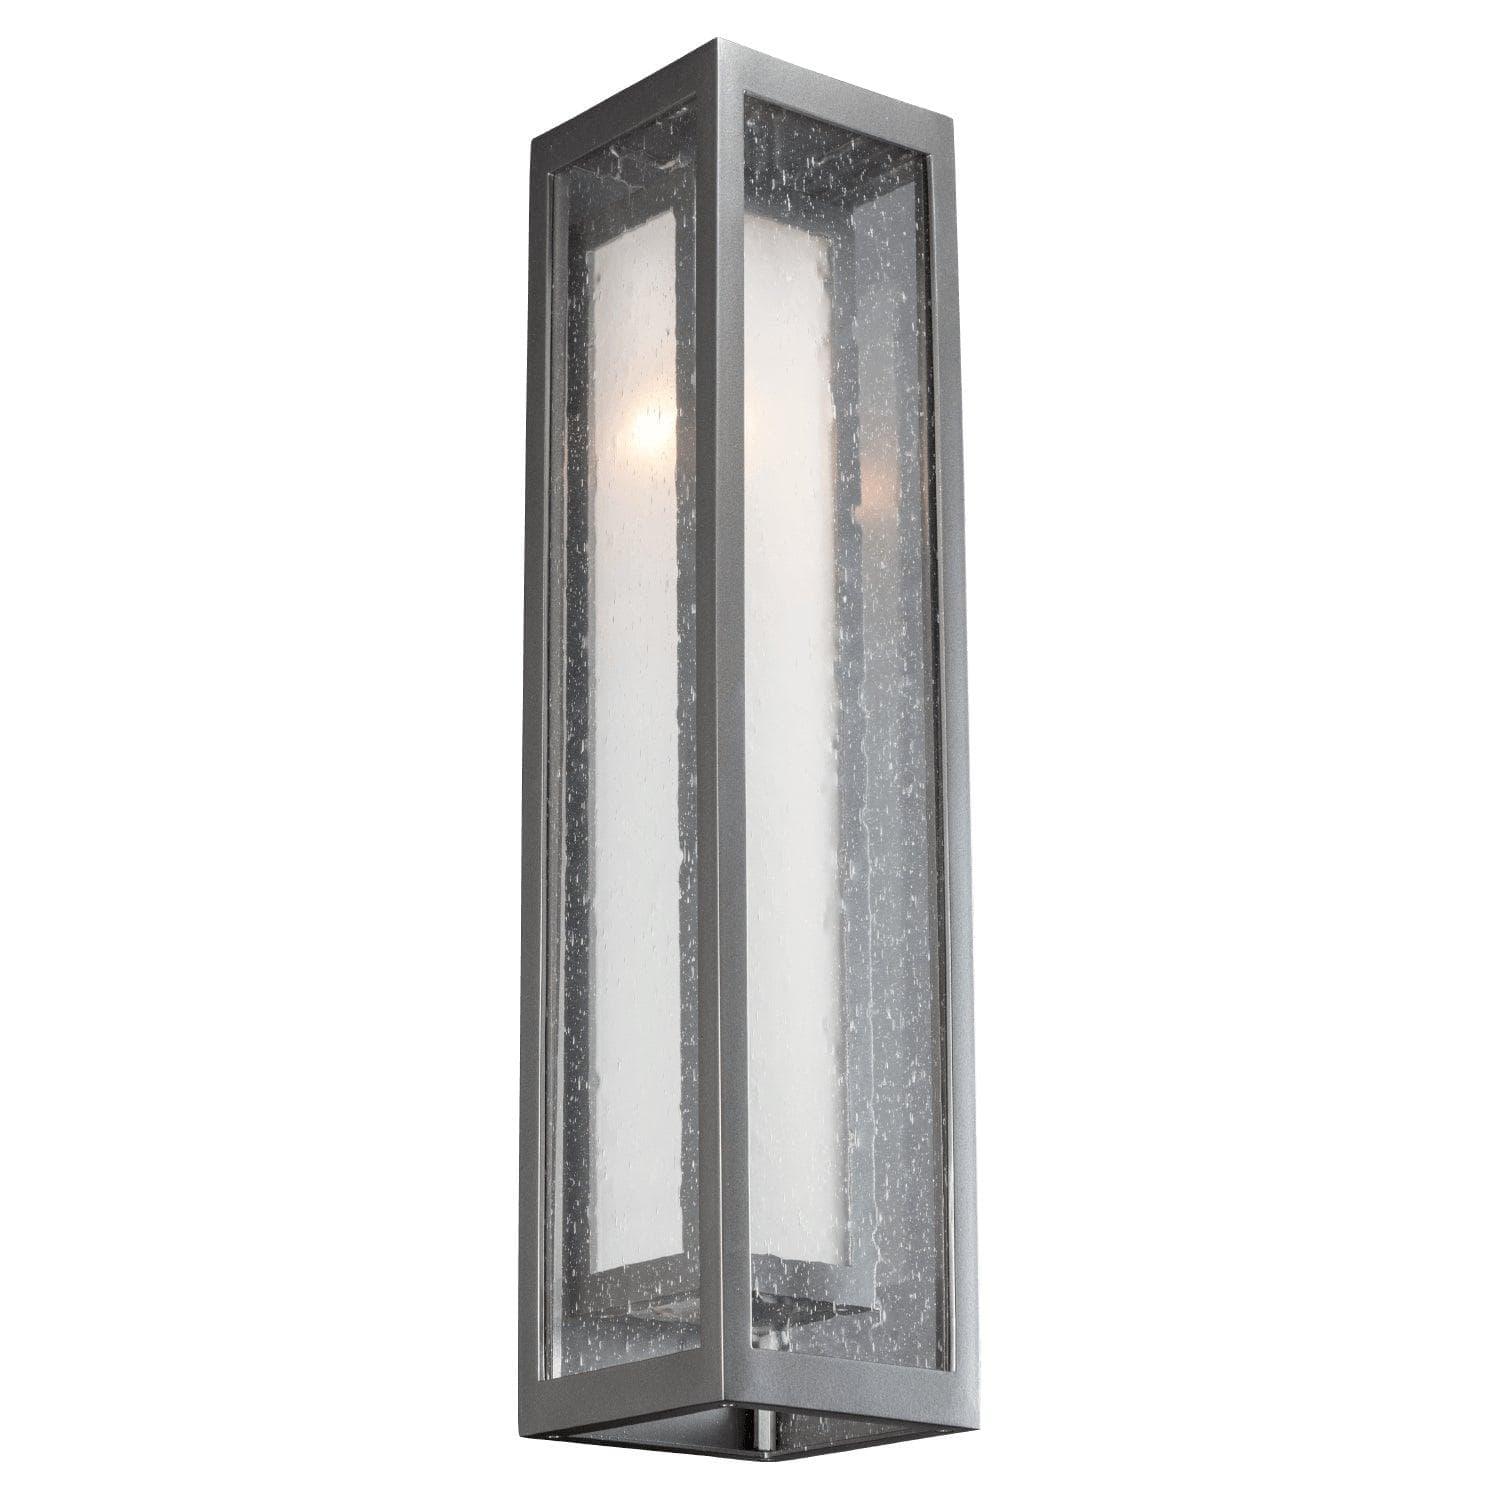 Hammerton Studio - Outdoor Tall Double Box Cover Sconce with Glass - ODB0027-26-AG-F-L2 | Montreal Lighting & Hardware